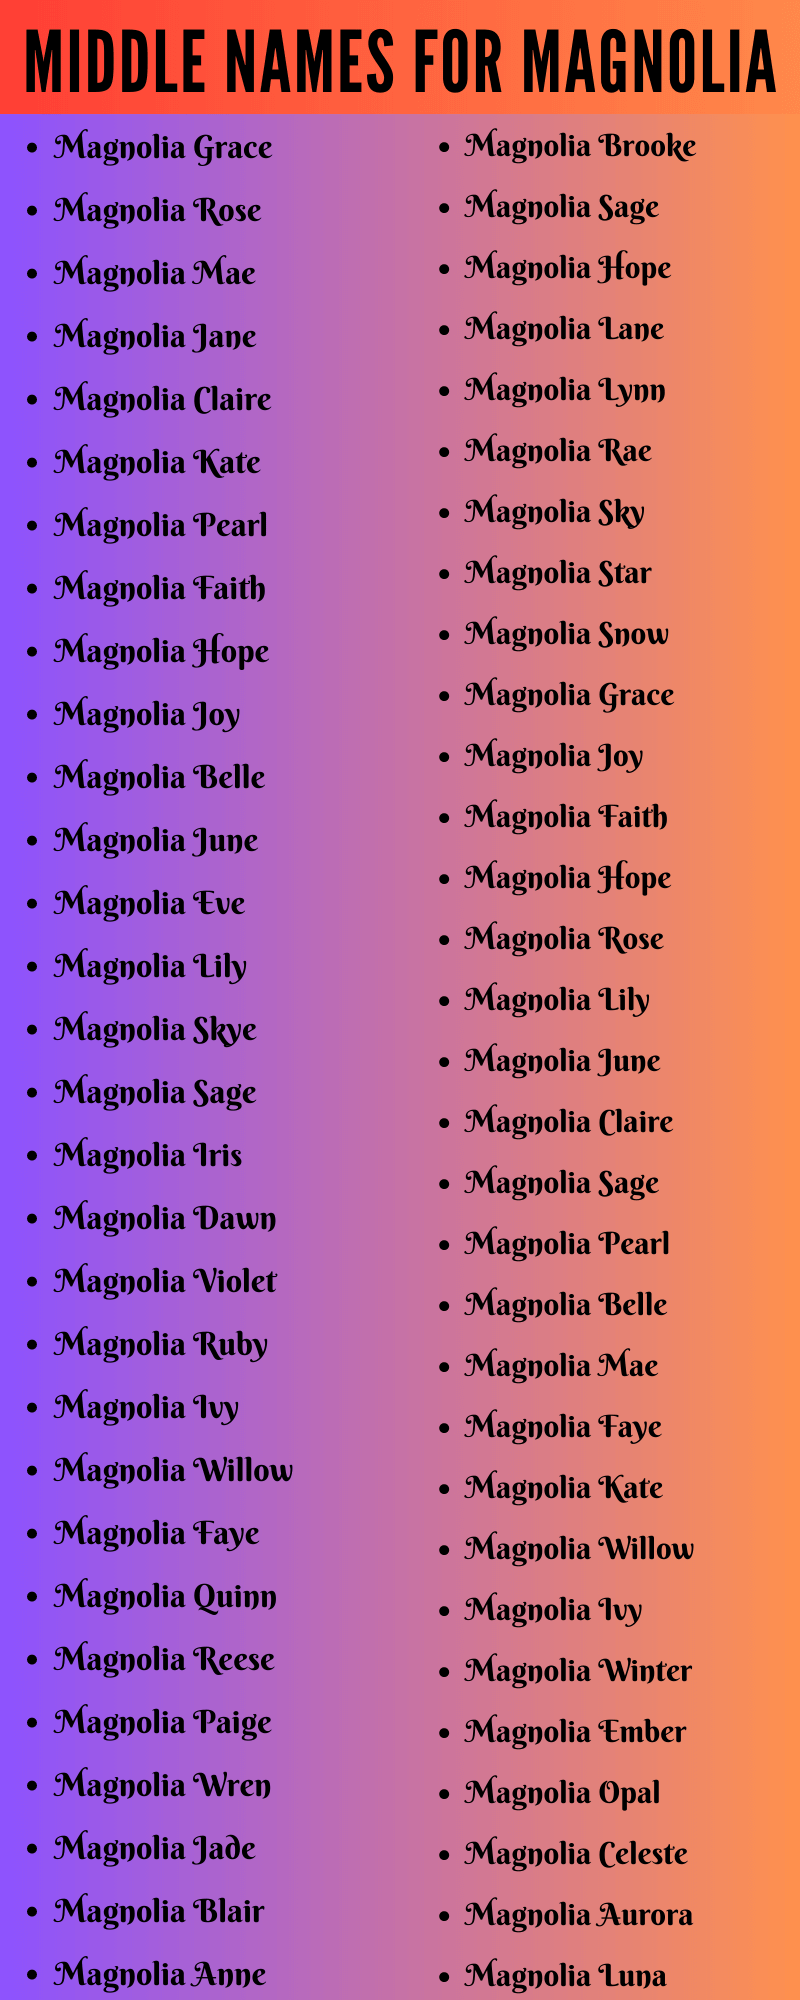  400 Amazing Middle Names For Magnolia